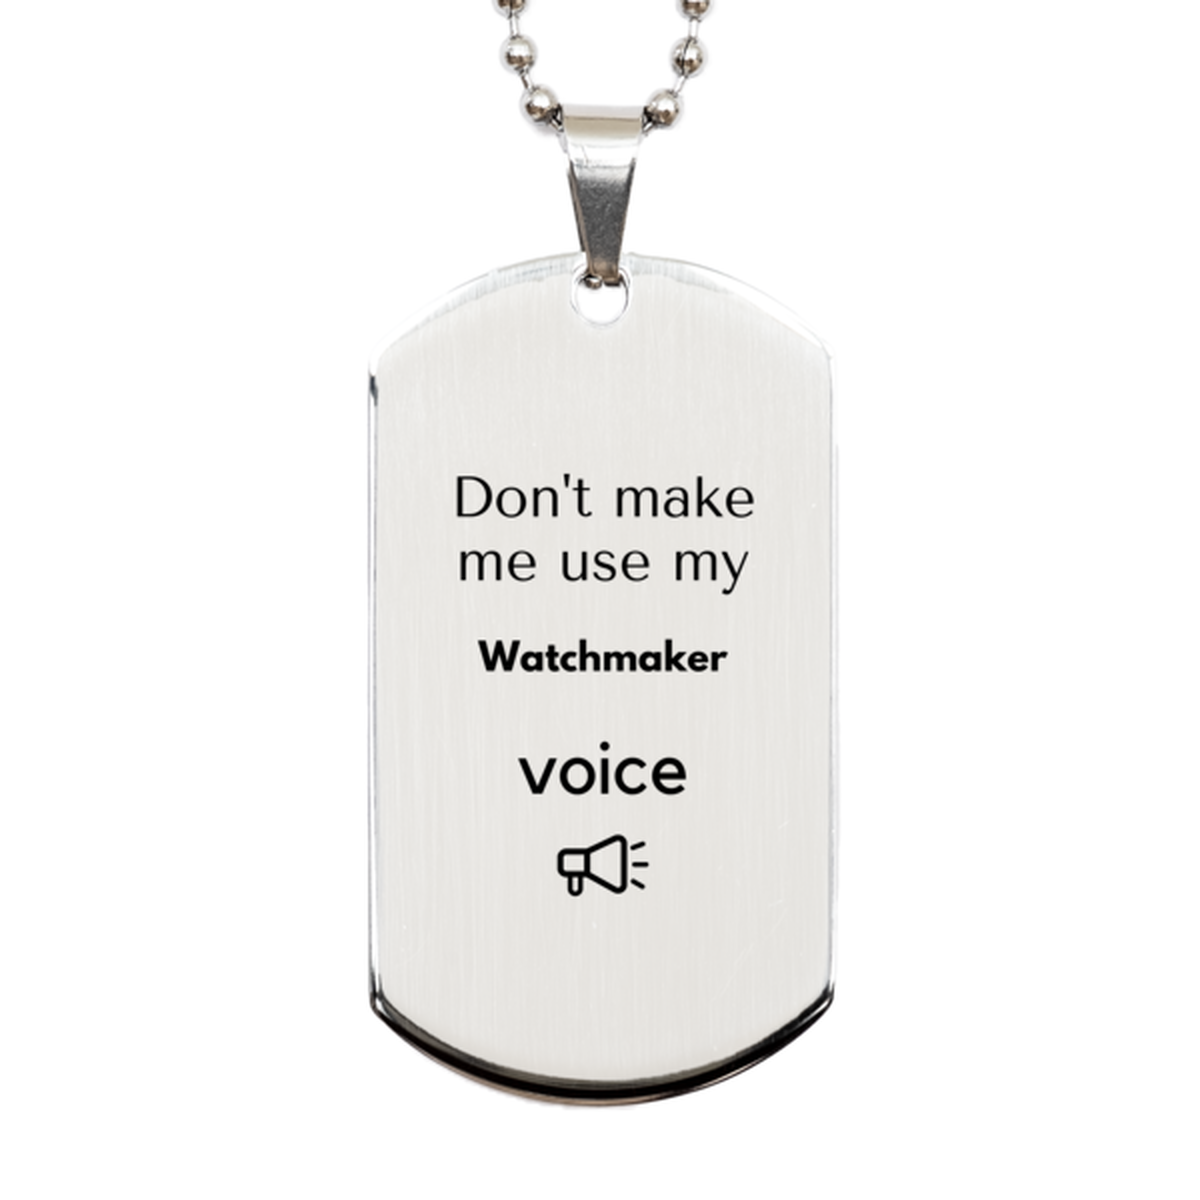 Don't make me use my Watchmaker voice, Sarcasm Watchmaker Gifts, Christmas Watchmaker Silver Dog Tag Birthday Unique Gifts For Watchmaker Coworkers, Men, Women, Colleague, Friends